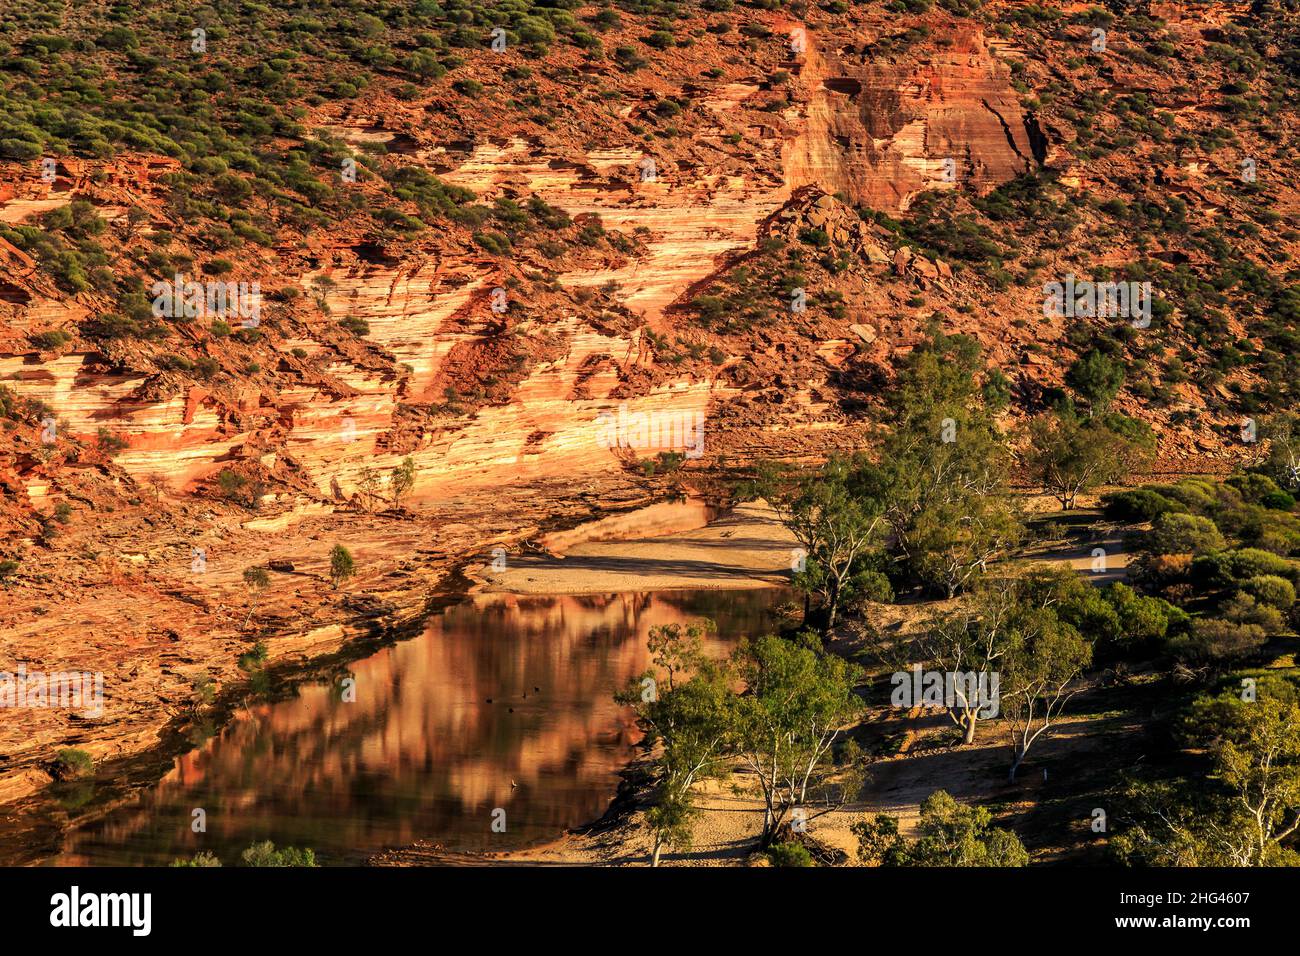 Red and white banded tumblagooda sandstone bluff in Murchison River Gorge at Kalbarri National Park Stock Photo